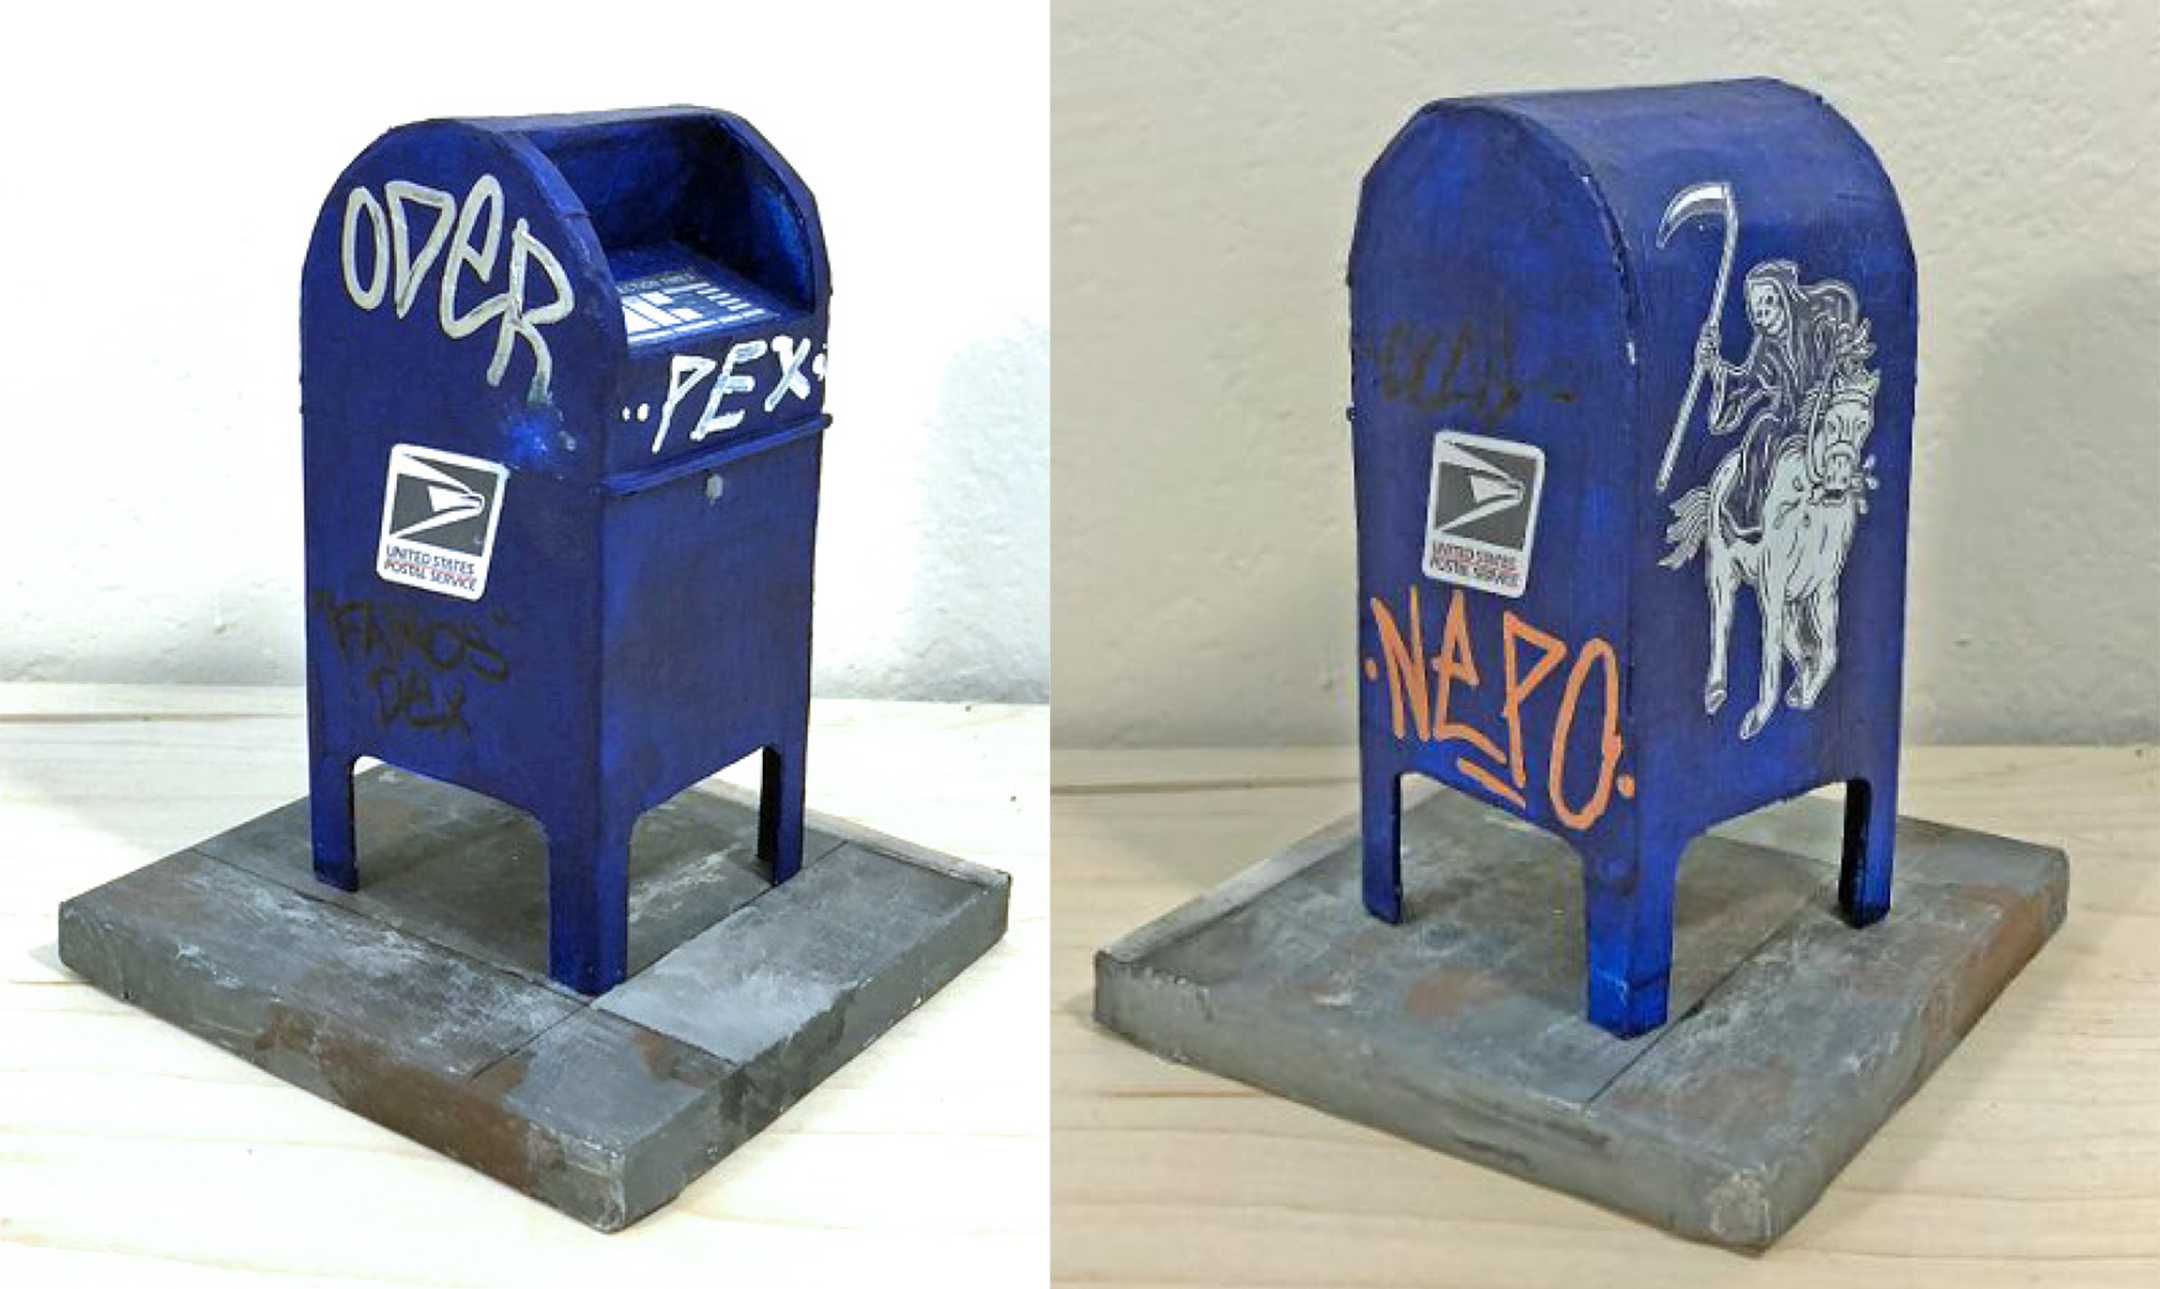 A miniature reproduction of a blue United States postal service mailbox